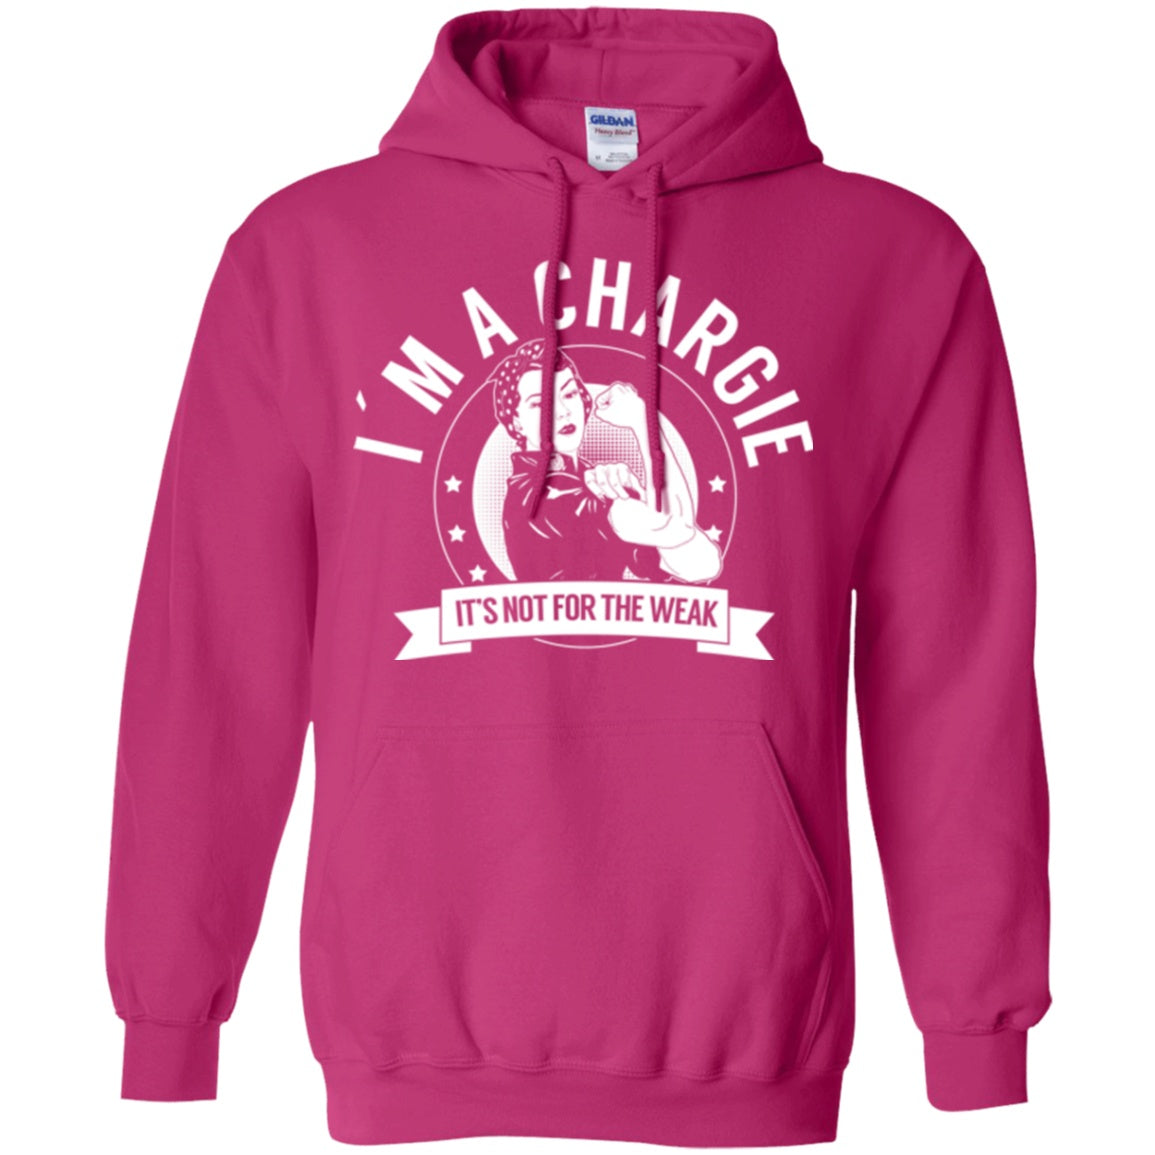 Chargie Not For The Weak Pullover Hoodie 8 oz. - The Unchargeables